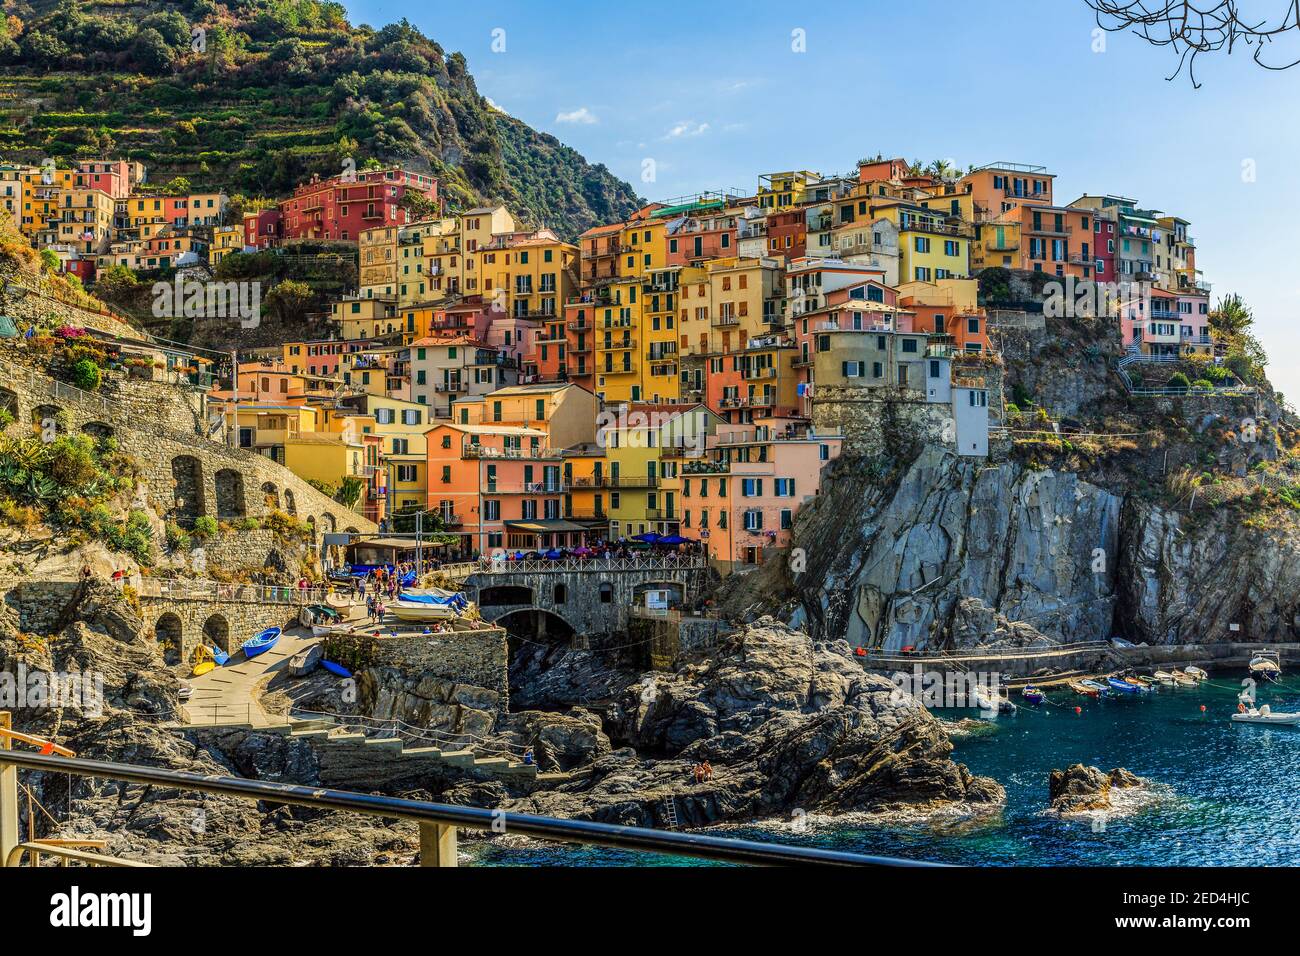 A bright seacoast afternoon light bathes the many colors of the houses in the Cinque Terre village of Manarola, with a view of its historic waterfront. Stock Photo